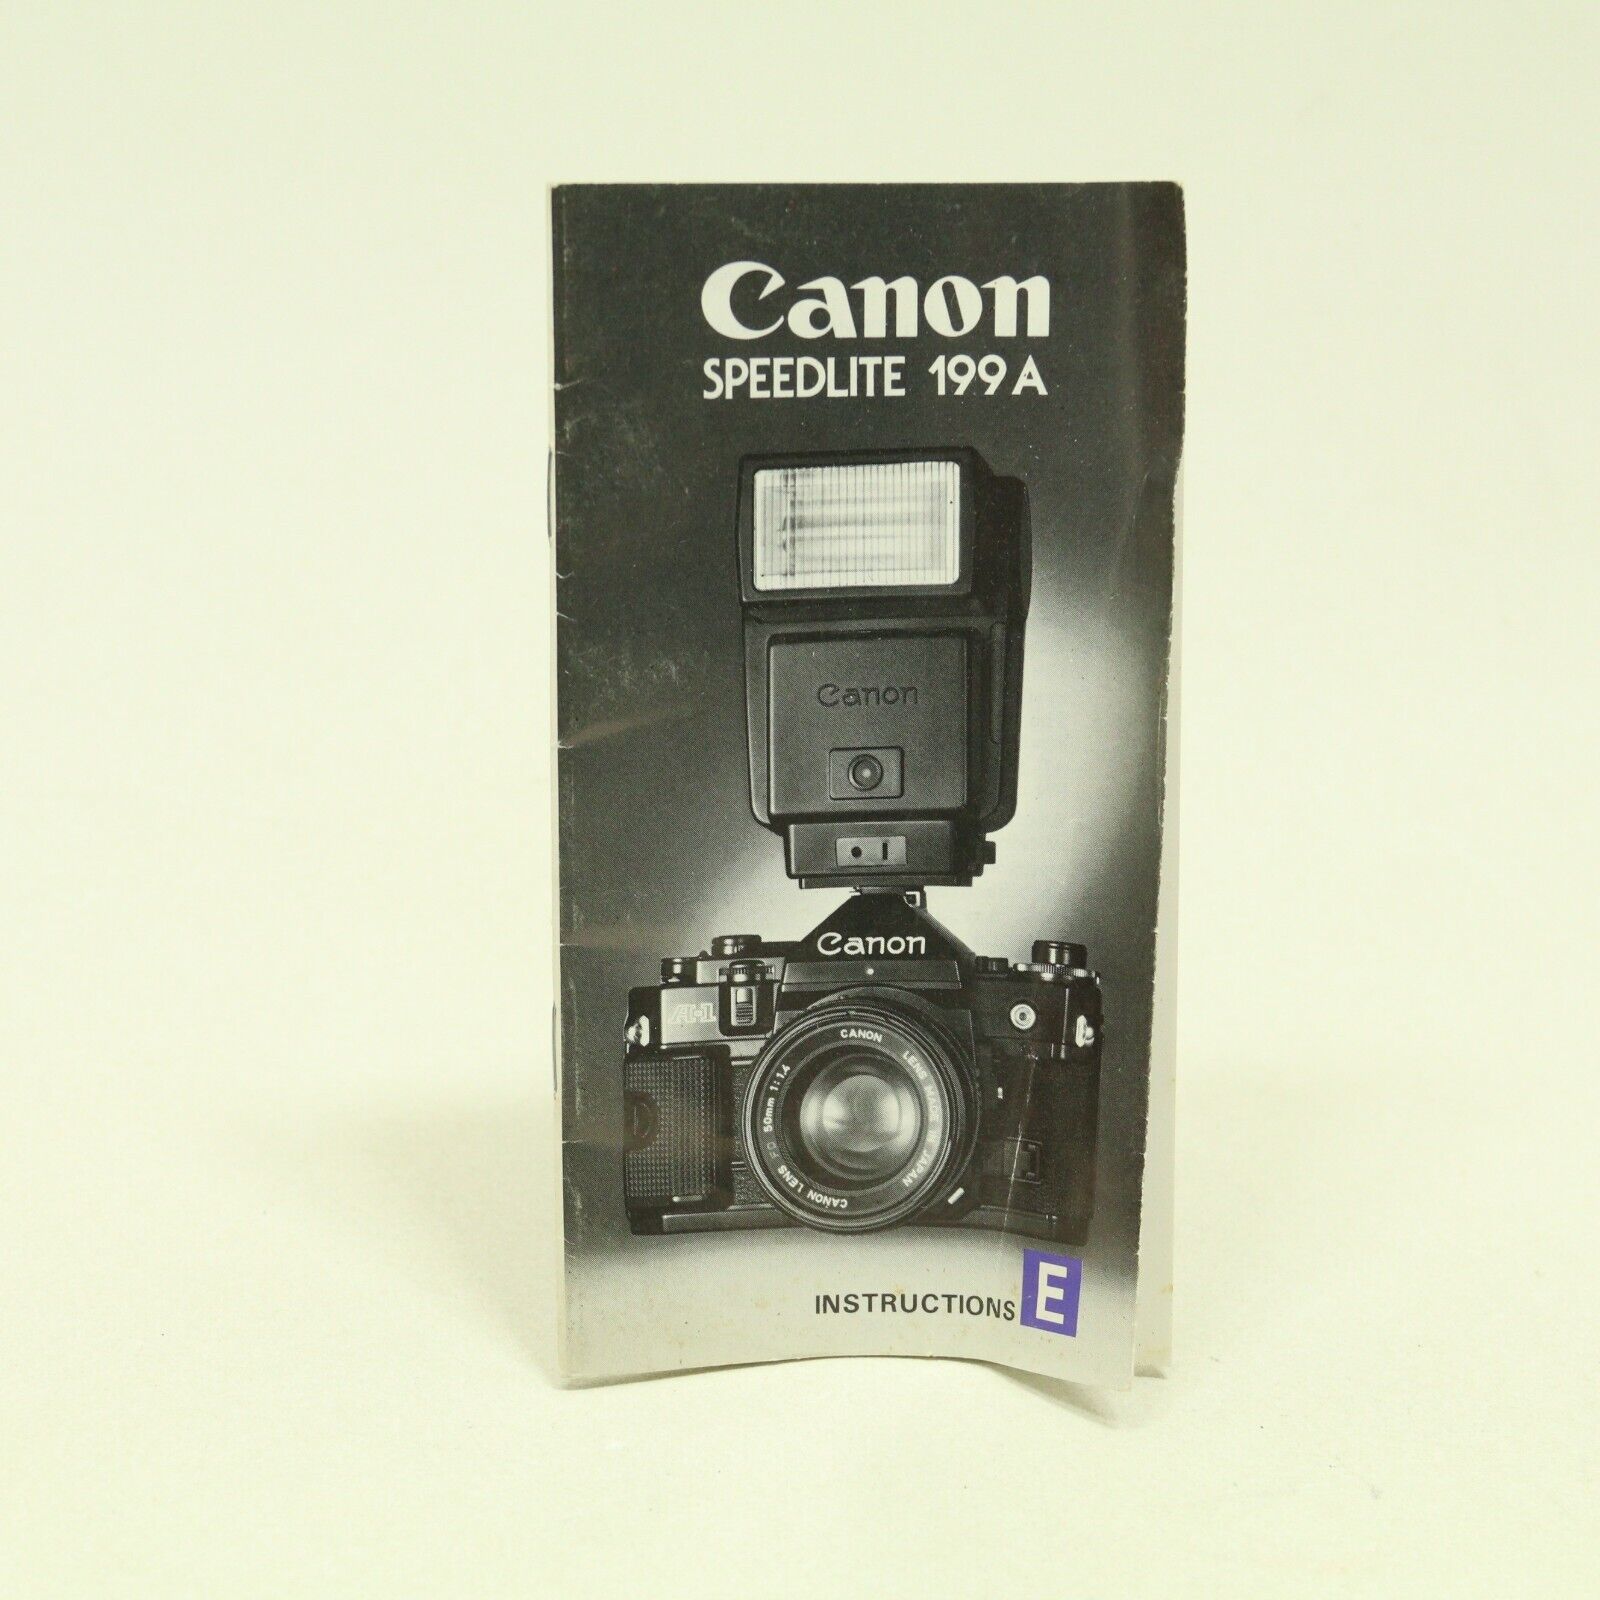 Primary image for Canon Speedlite 199A Shoe Mount Flash User's Manual ONLY*